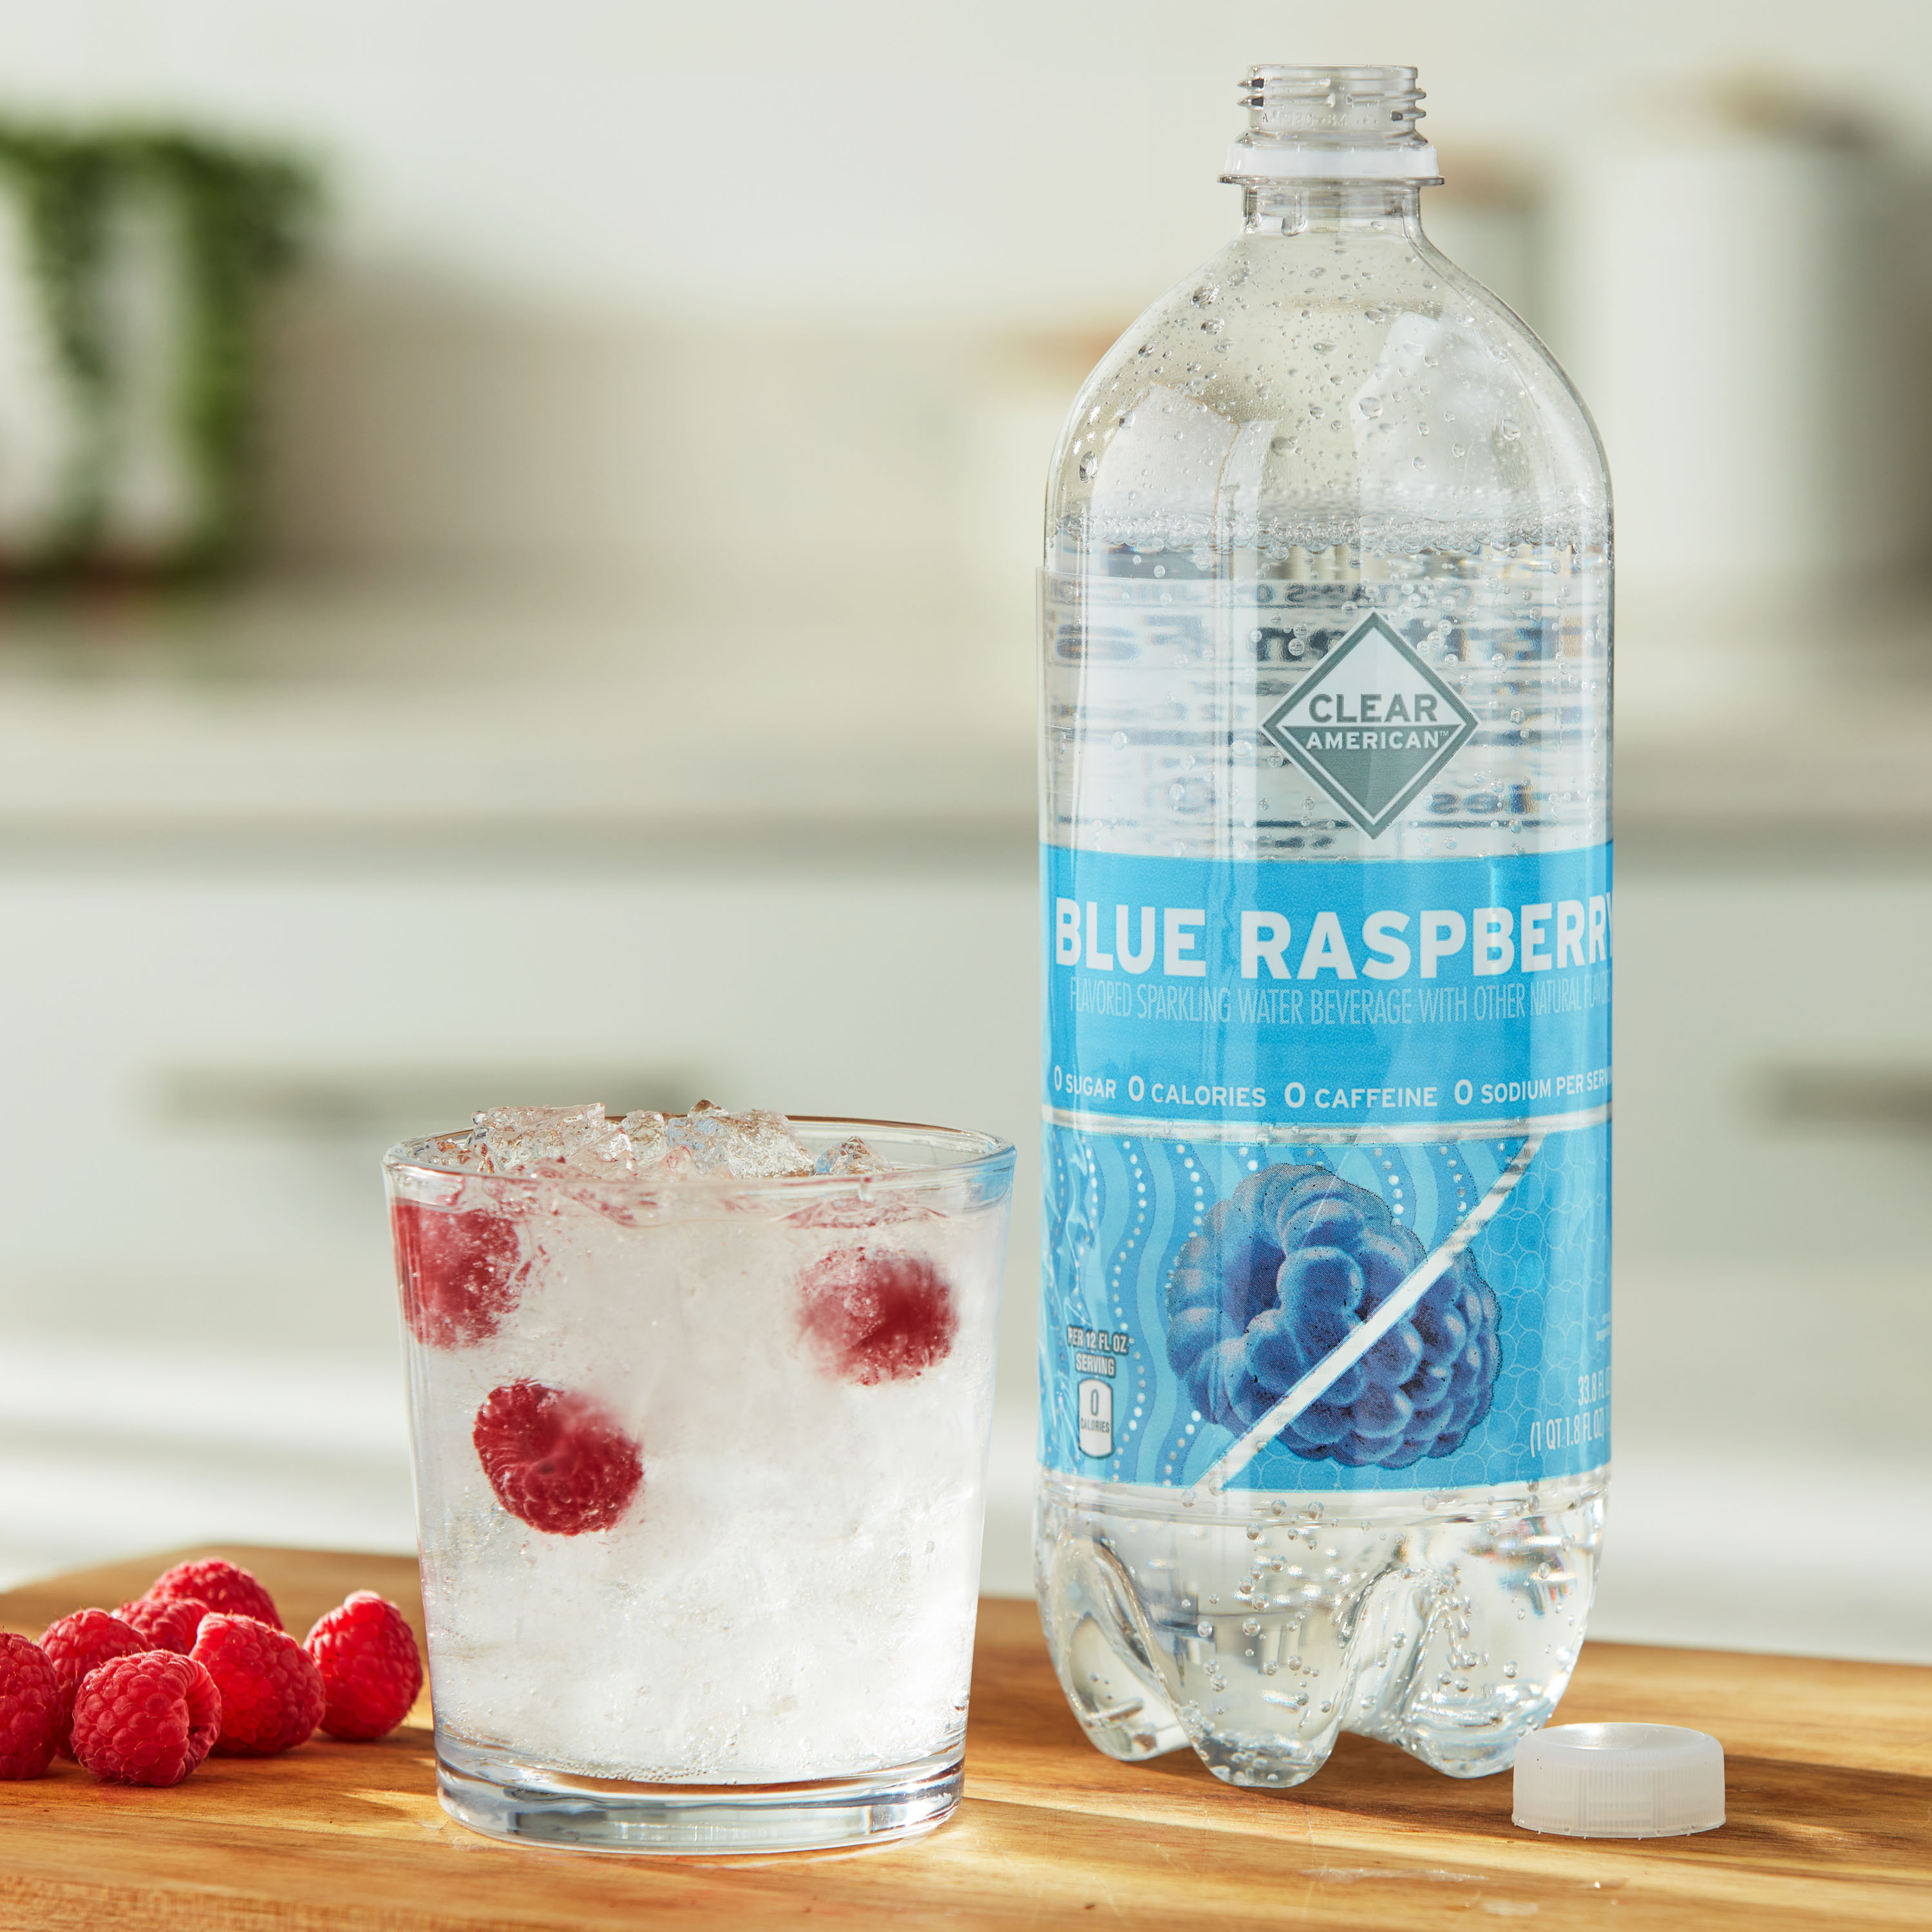 Clear American Blue Raspberry Sparkling Water, 33.8 fl oz, Bottle - image 3 of 9